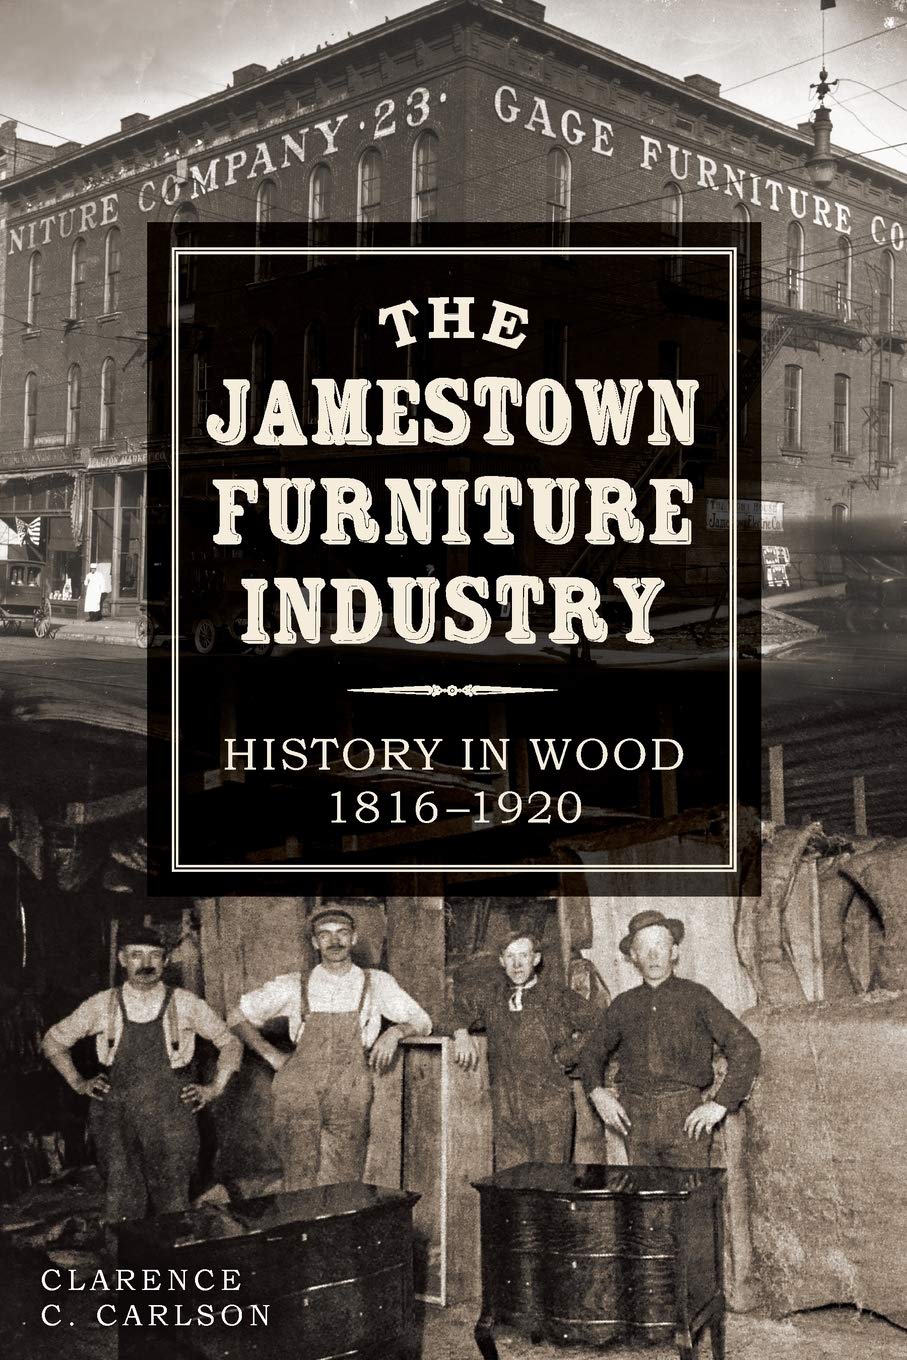 The Jamestown Furniture Industry: History in Wood 1817-1920